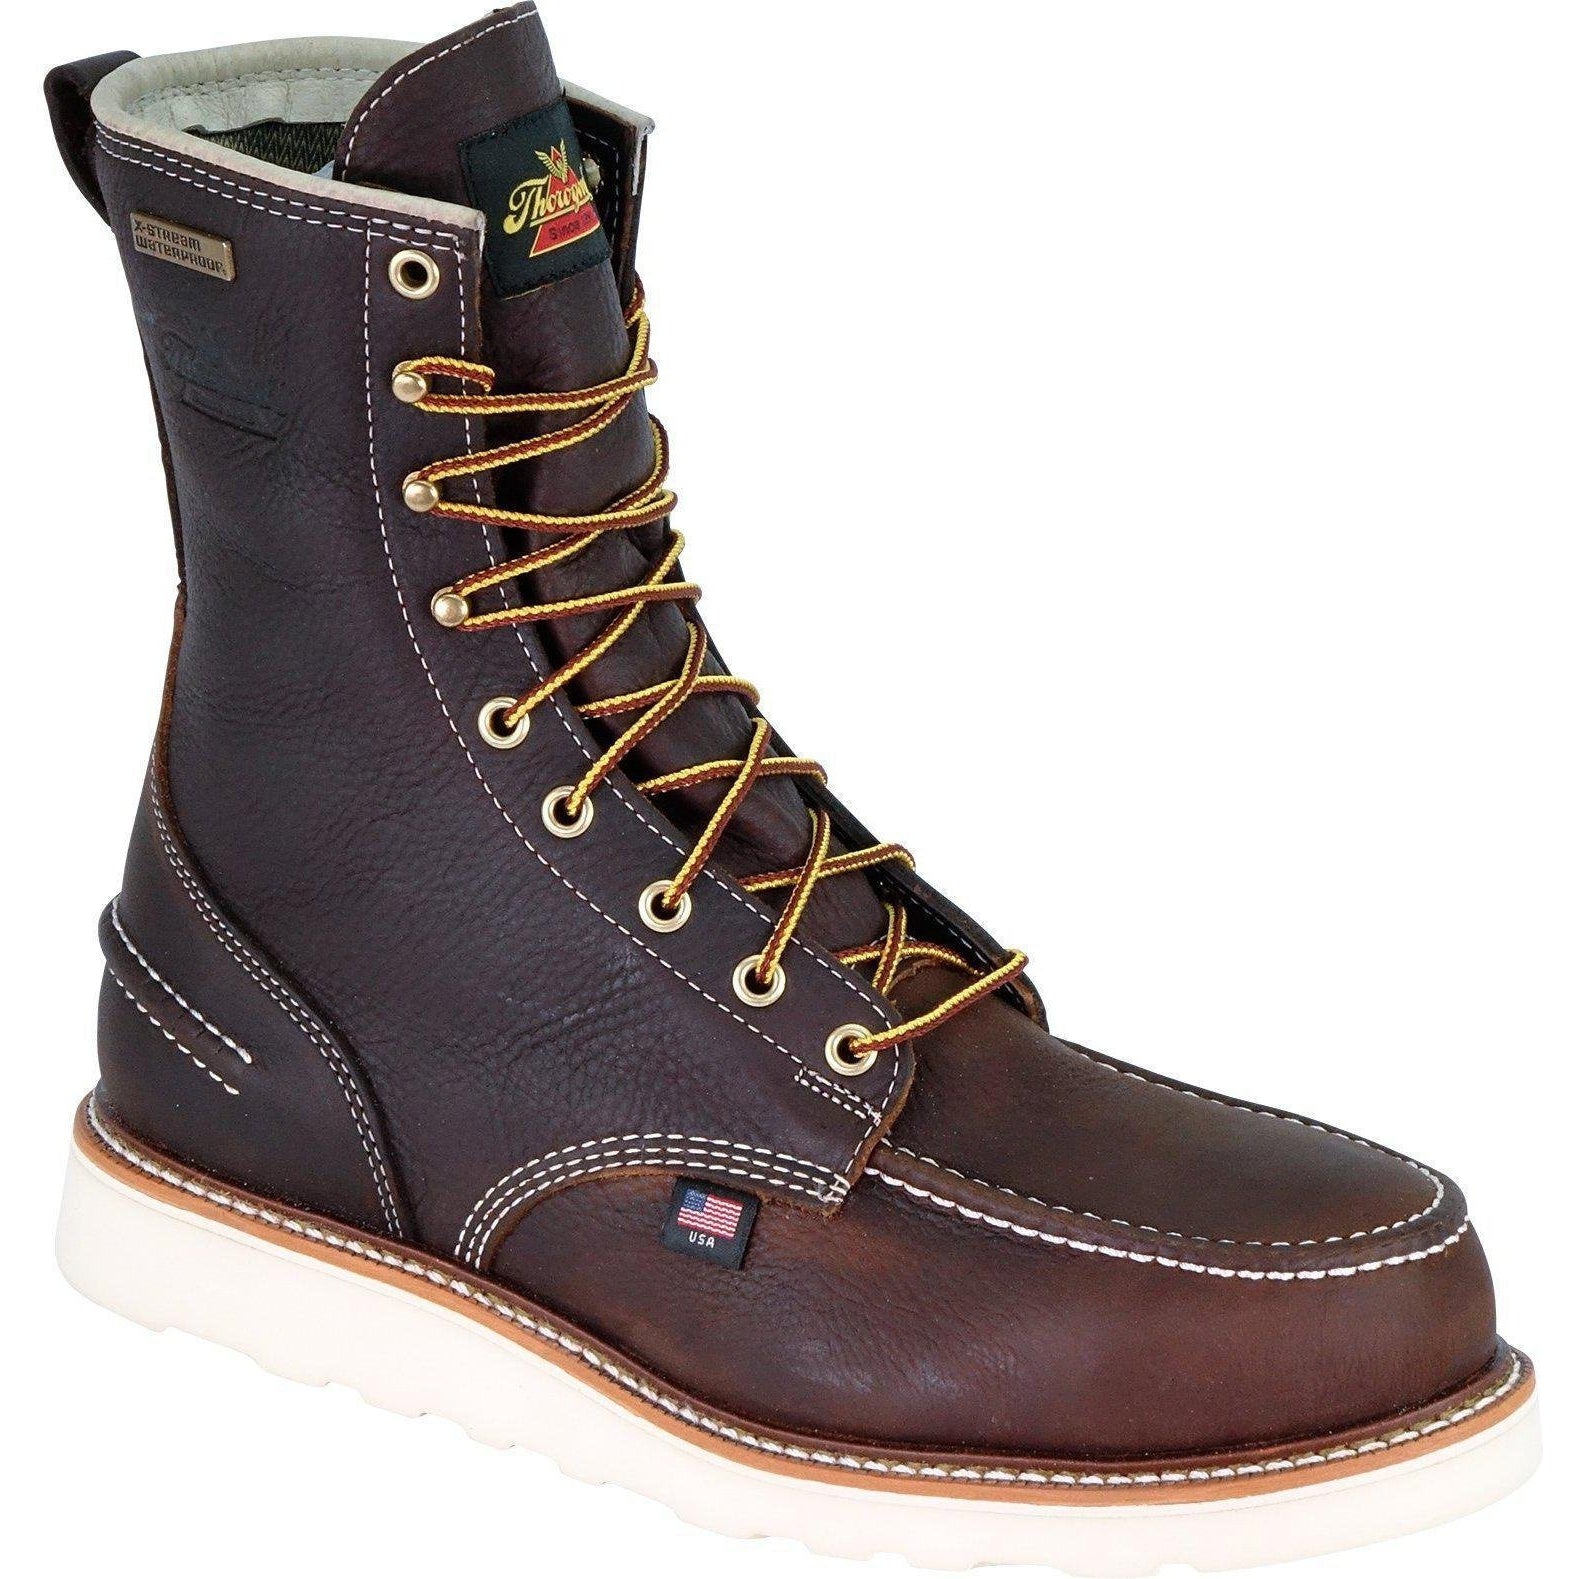 Thorogood Men's USA Made 1957 8" Moc Safety Toe WP Wedge Work Boot 804-3800  - Overlook Boots